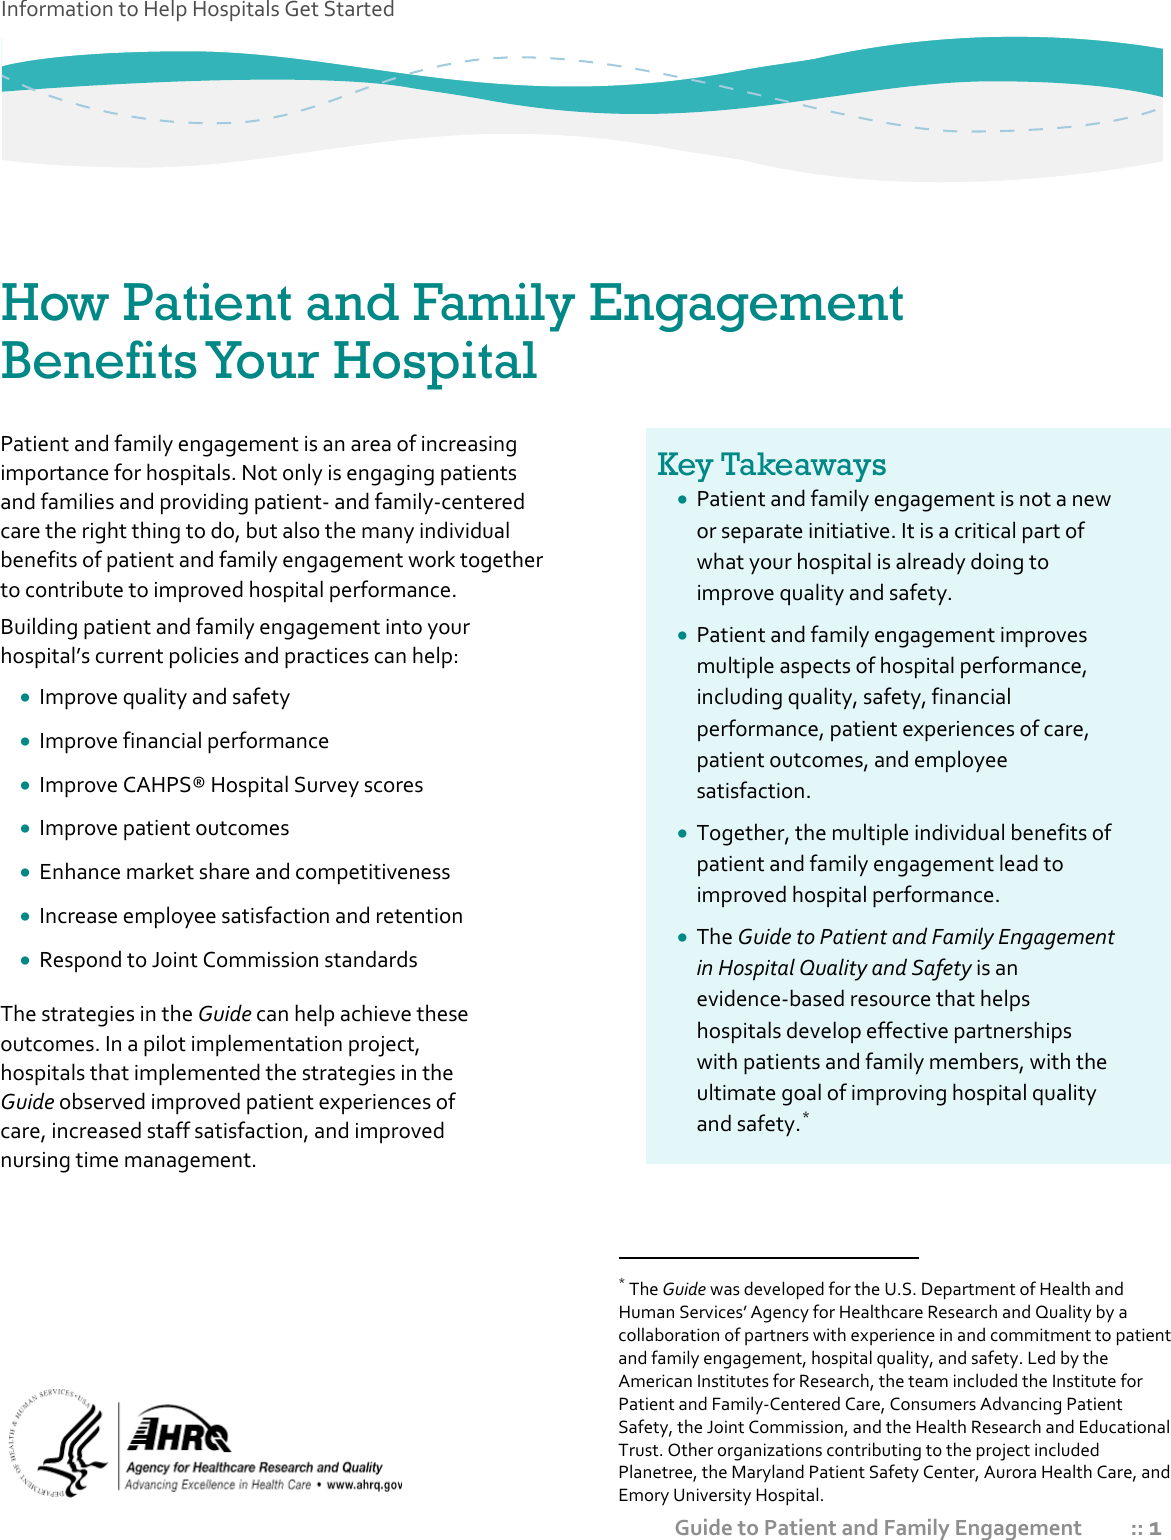 Page 1 of 4 - Information To Help Hospitals Get Started ://www.ahrq.gov/sites/default/files/wysiwyg/professionals/systems/hospital/engagingfamilies/howtogetstarted/How_PFE_Benefits_Hosp_508 How PFE Benefits Hosp 508